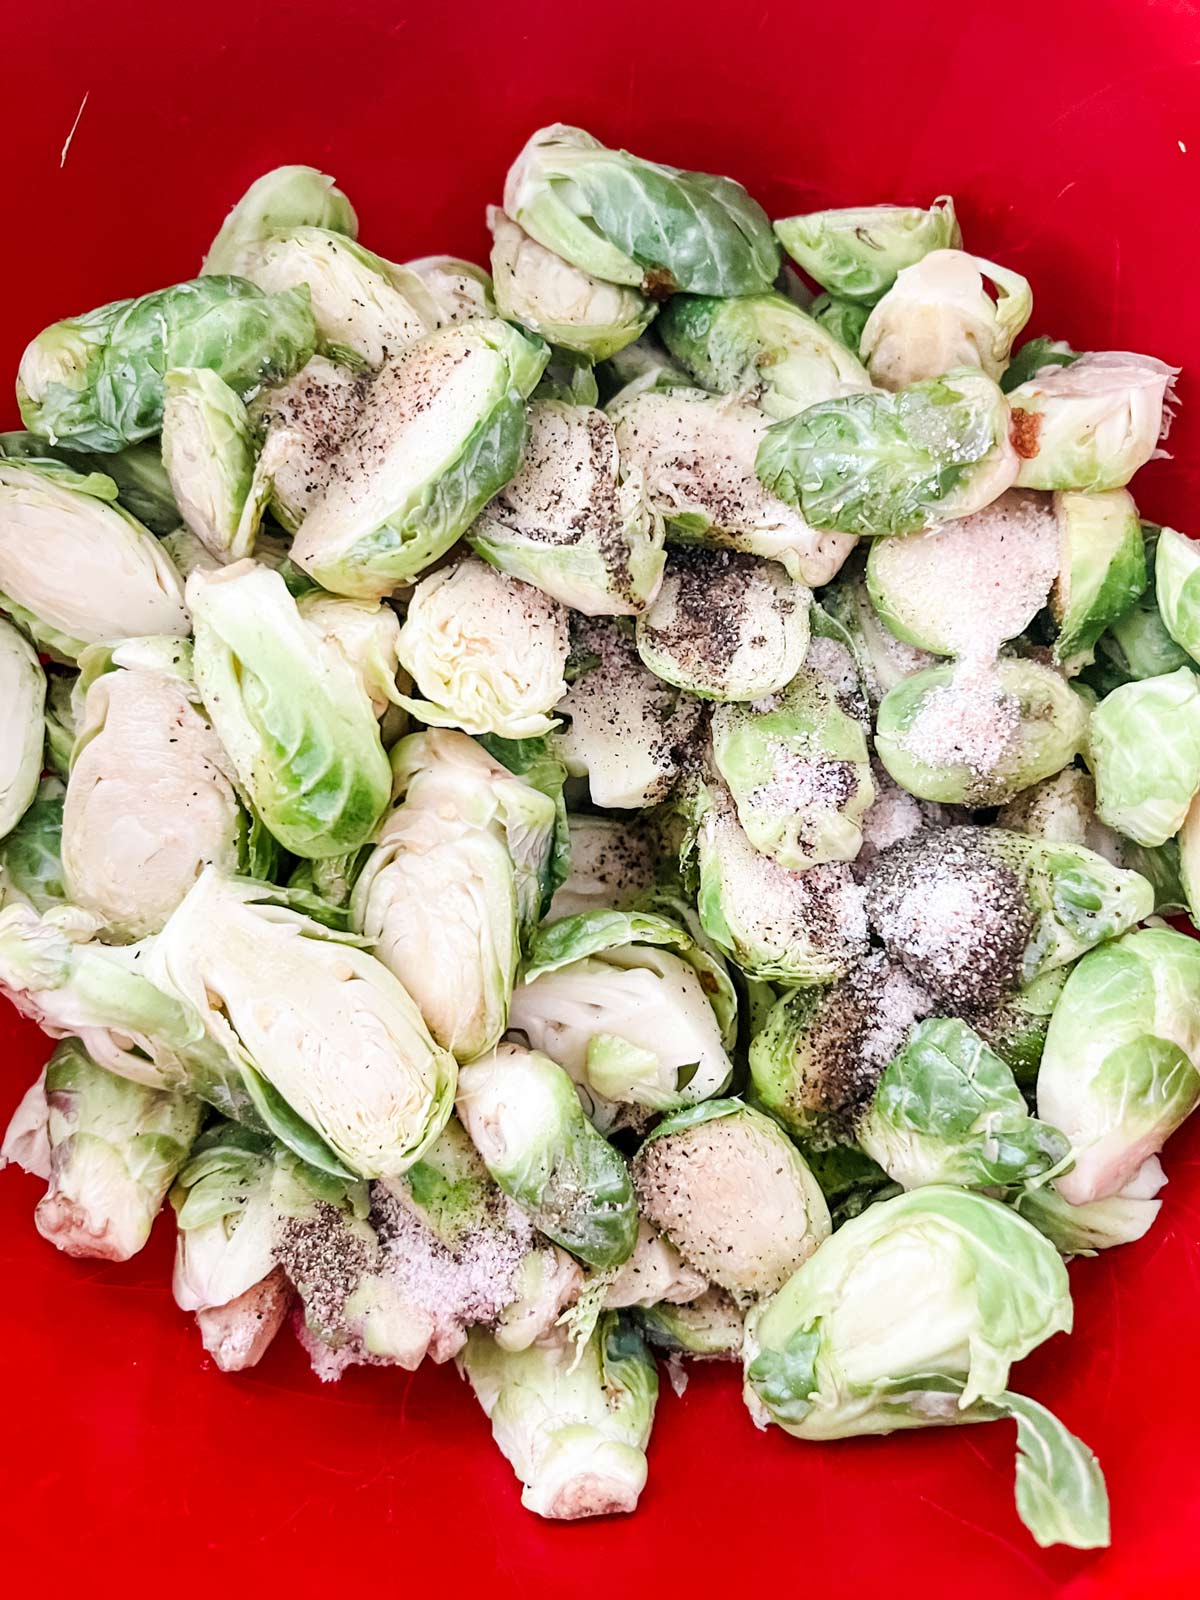 Brussels sprouts in a red bowl with seasonings on top.